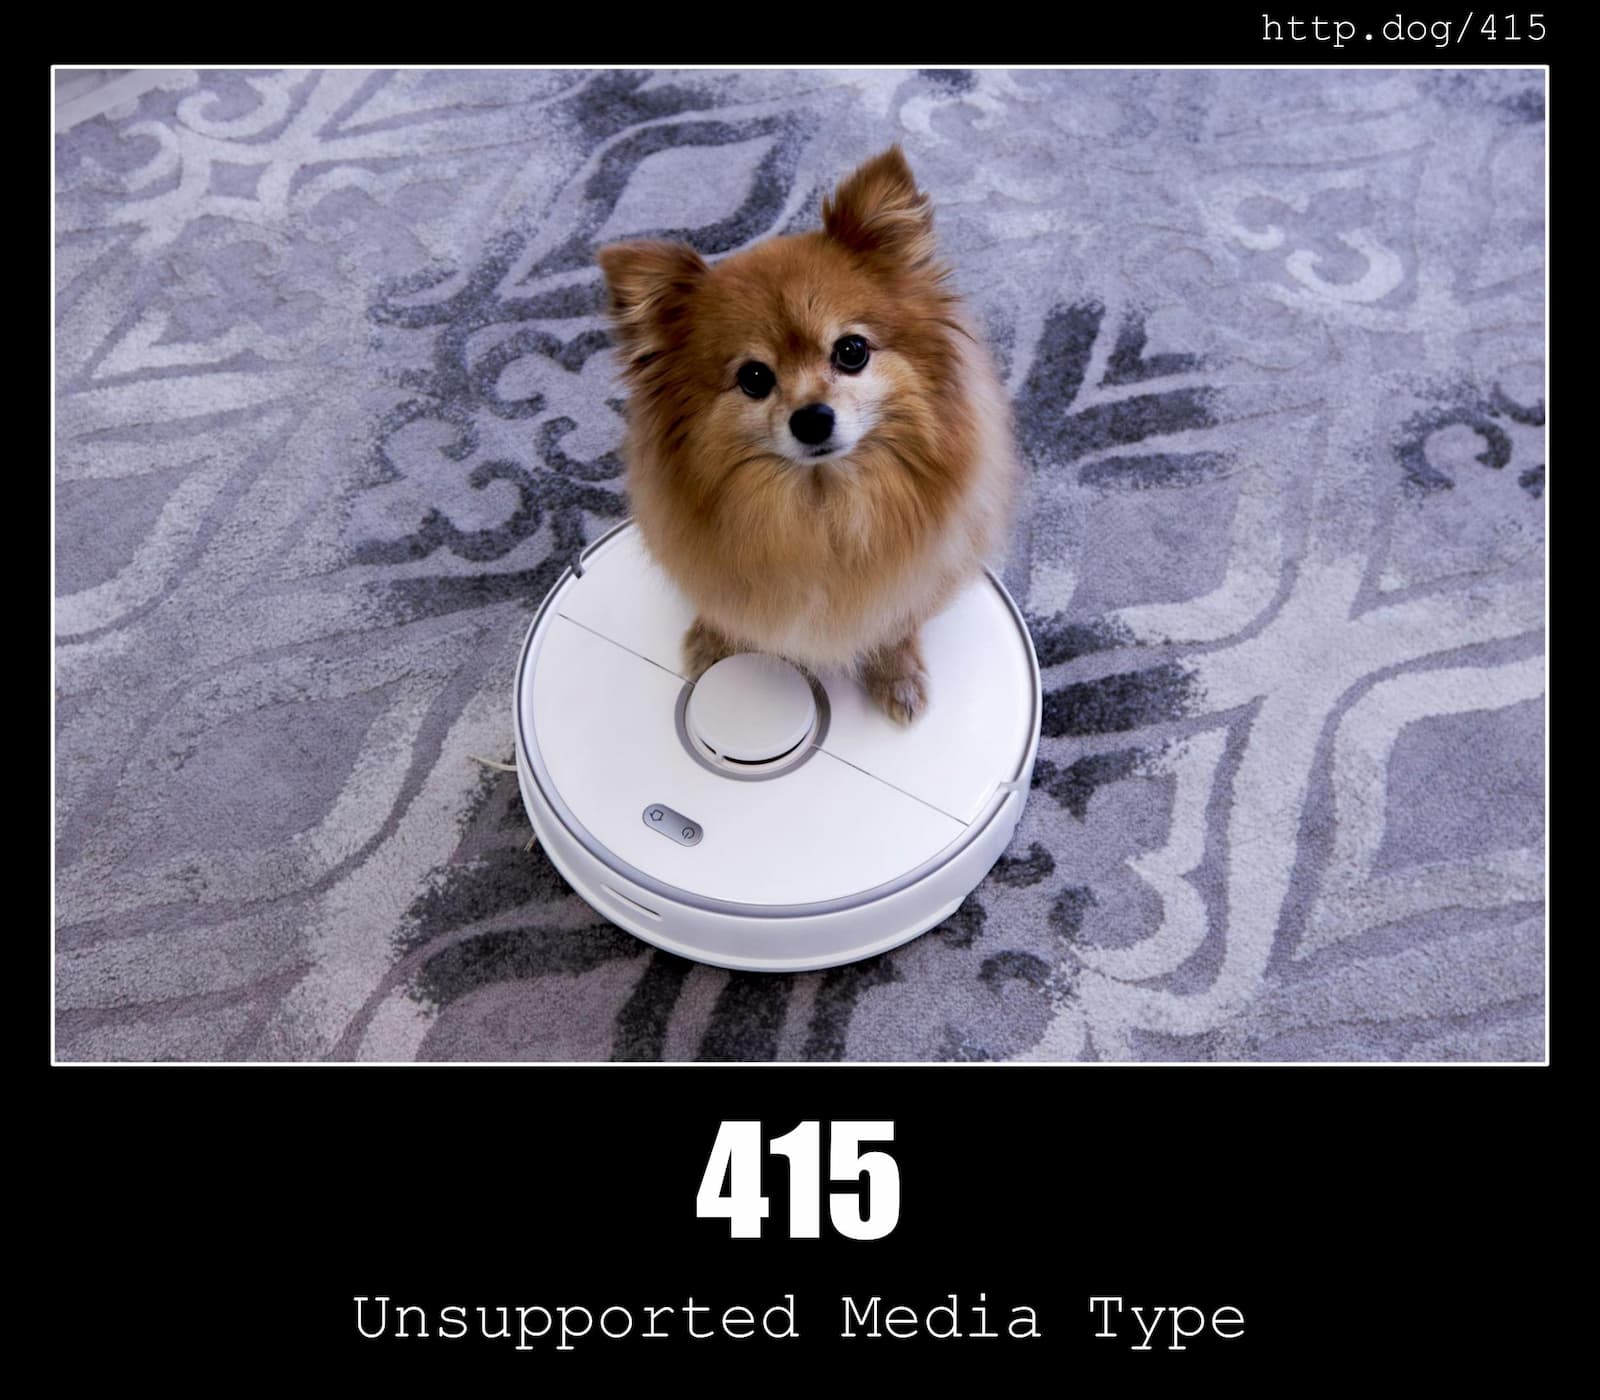 HTTP Status Code 415 Unsupported Media Type & Dogs